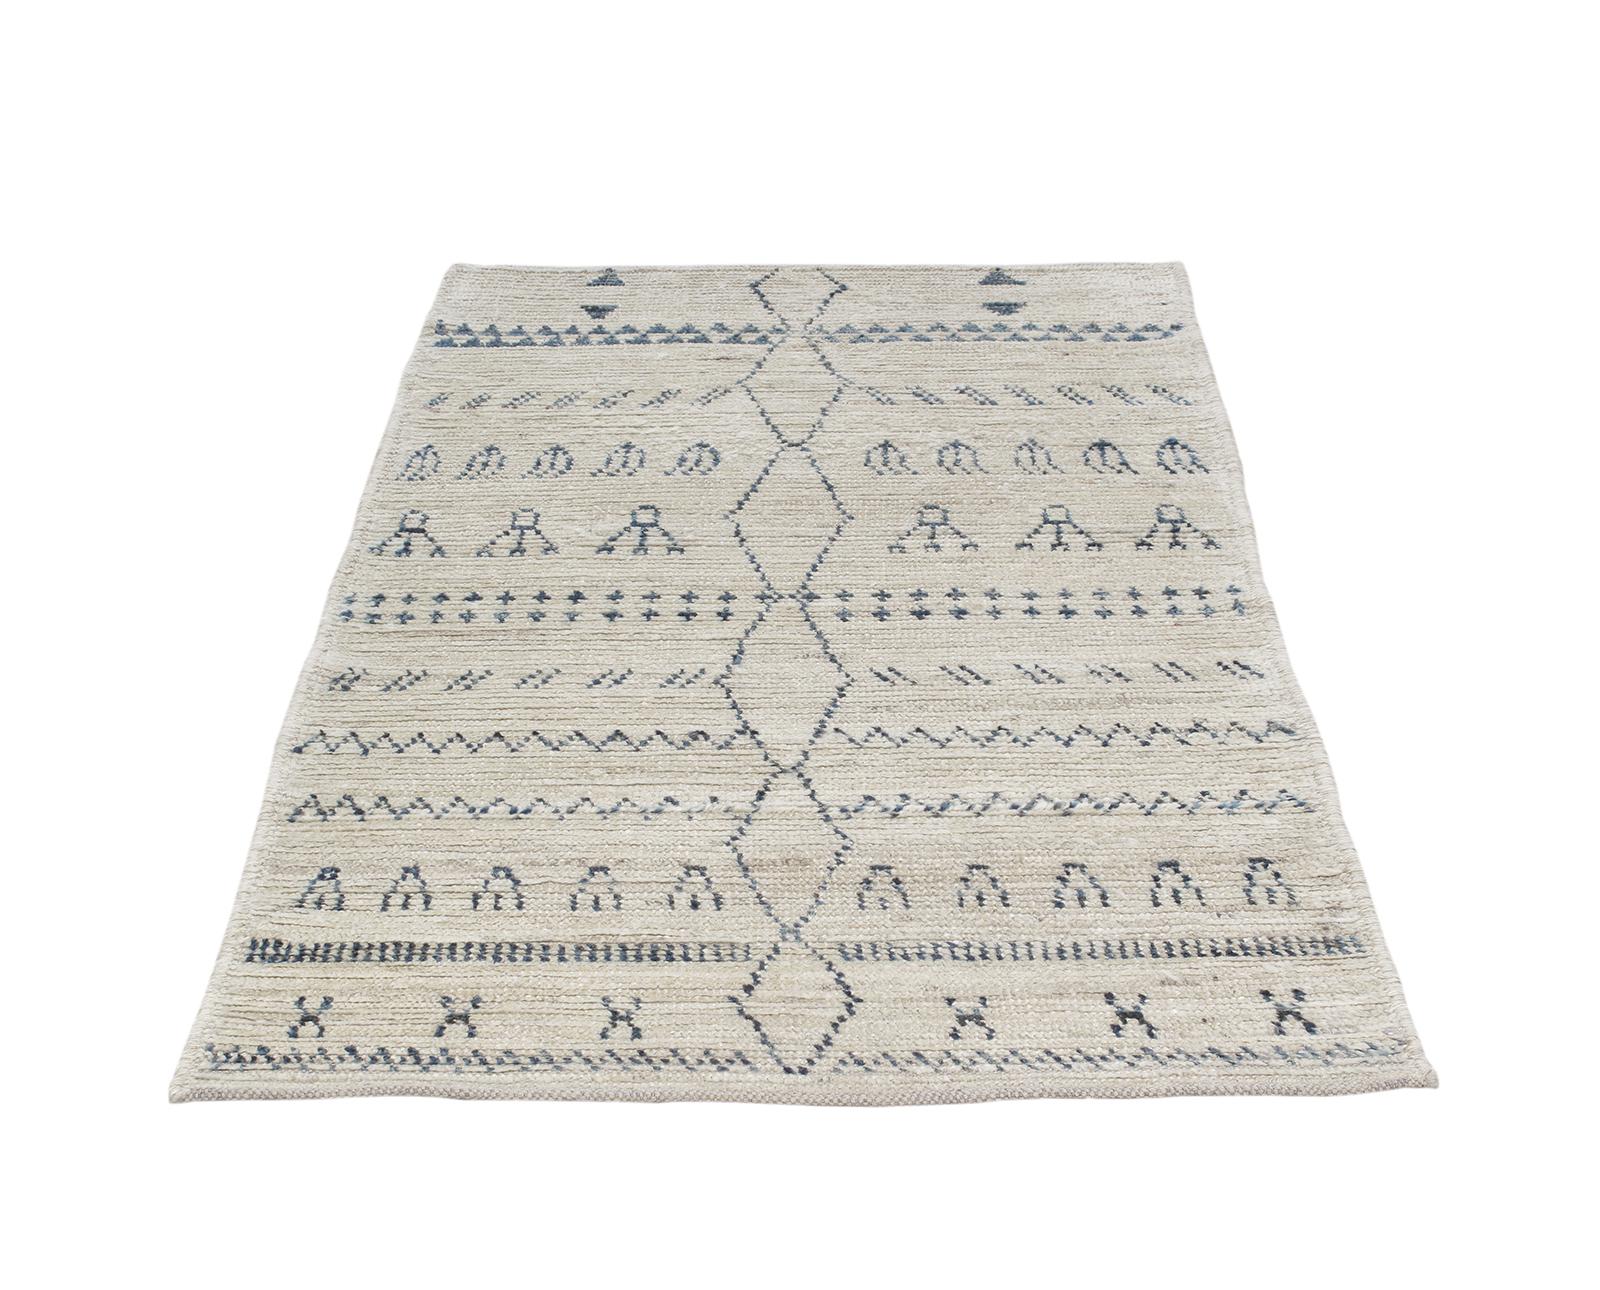 This rug resembles the Berber tribal rugs that have been made in Morocco for centuries in the Atlas Mountain region. Crafted with the same hand-carded, hand-spun wool, it is hand-knotted in a truly artistic organic pattern by local weavers in